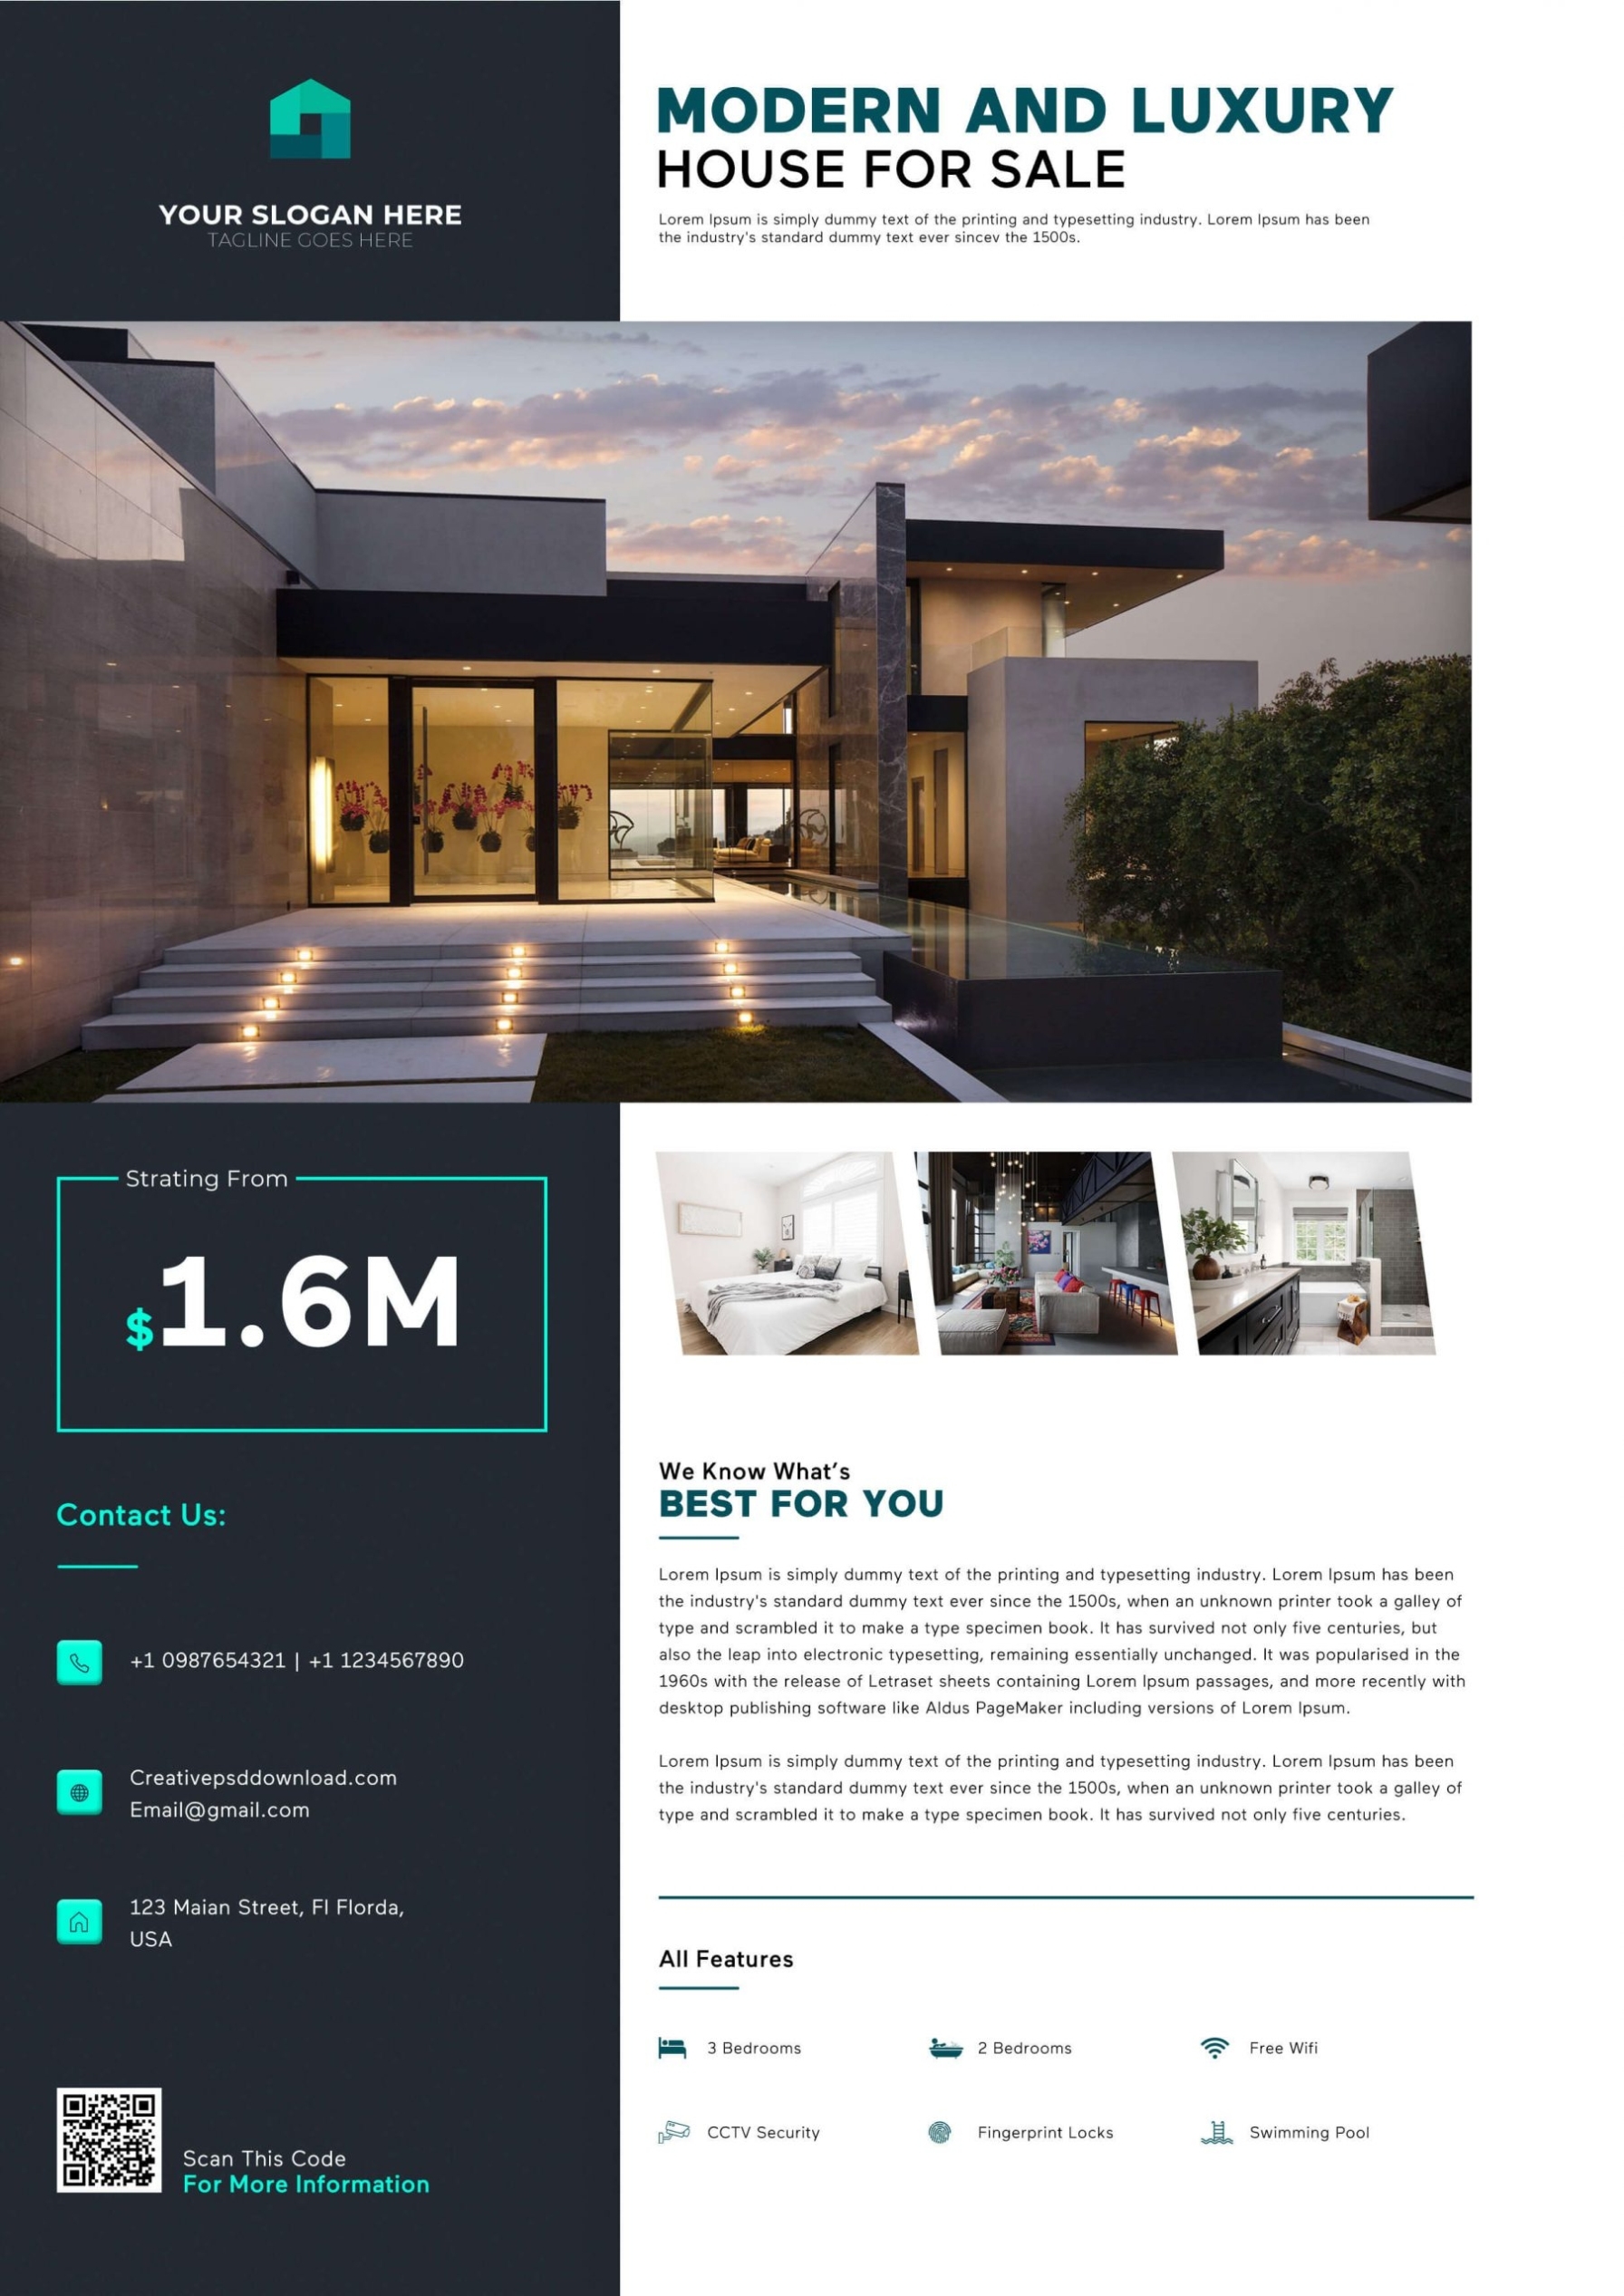 Creative Real Estate Flyer Free Psd For Real Estate Flyer Template Psd